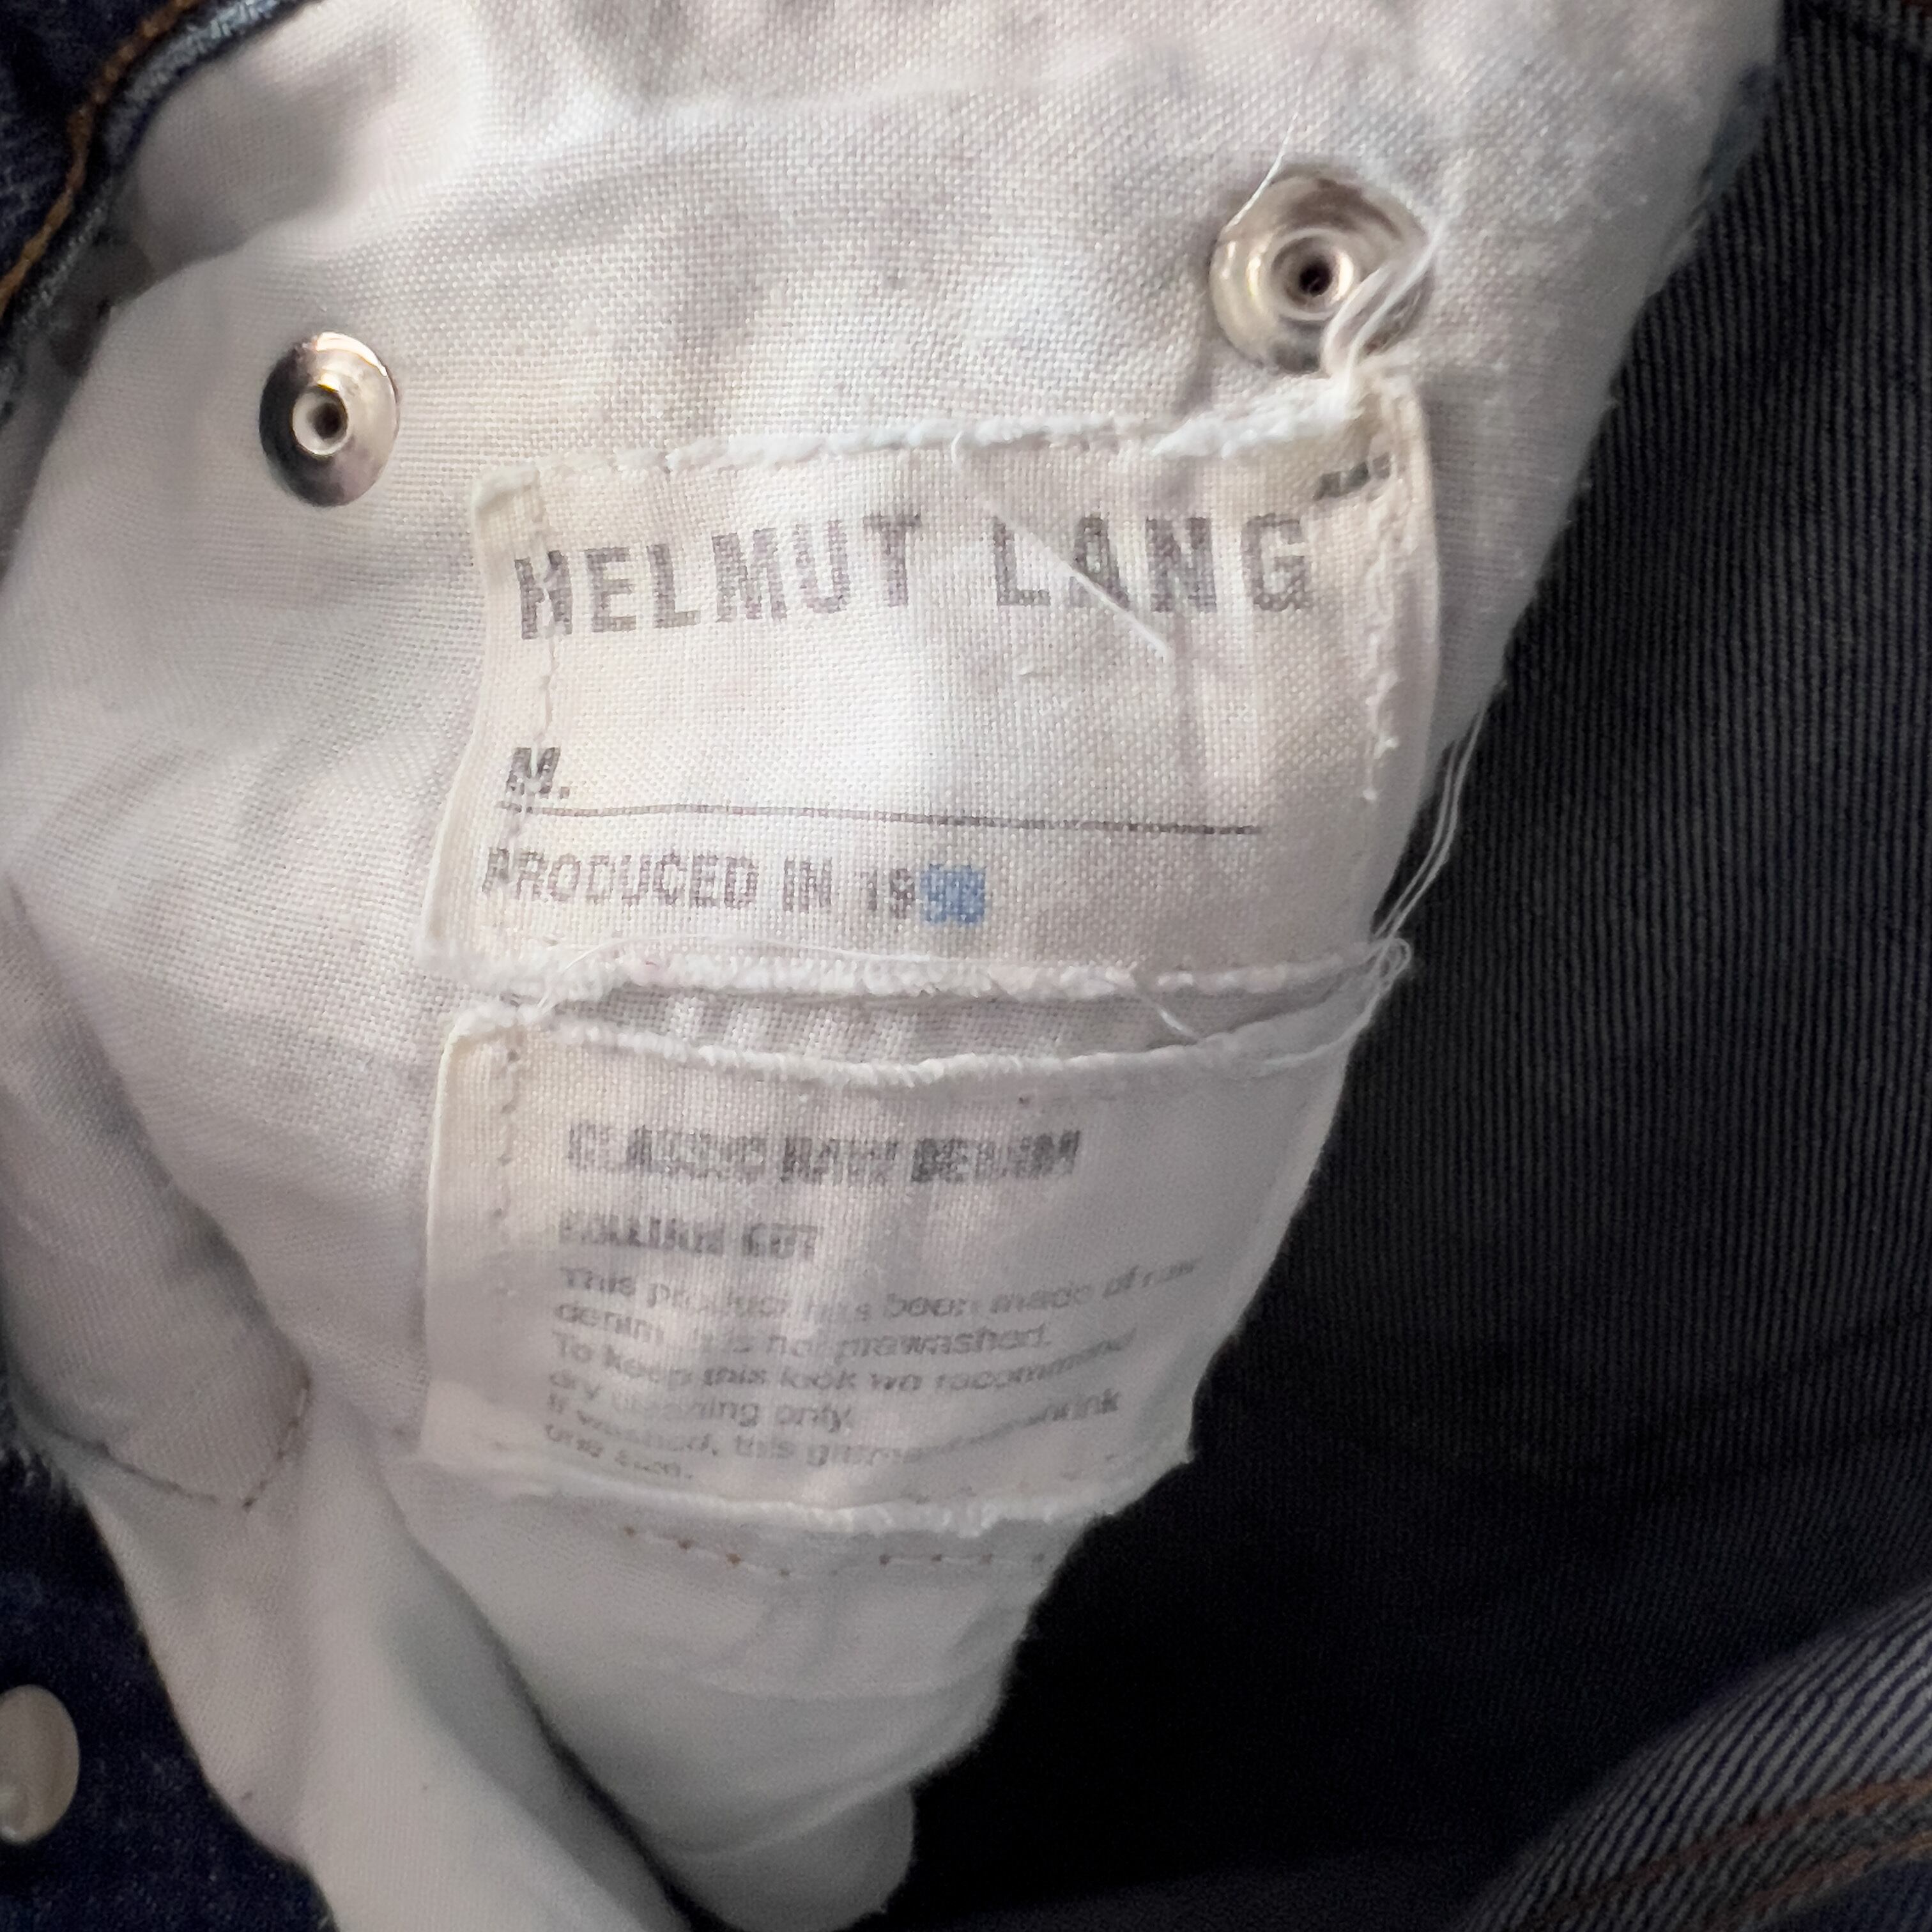 helmut lang” produced in 1998 本人期 classic raw denim ヘルムート